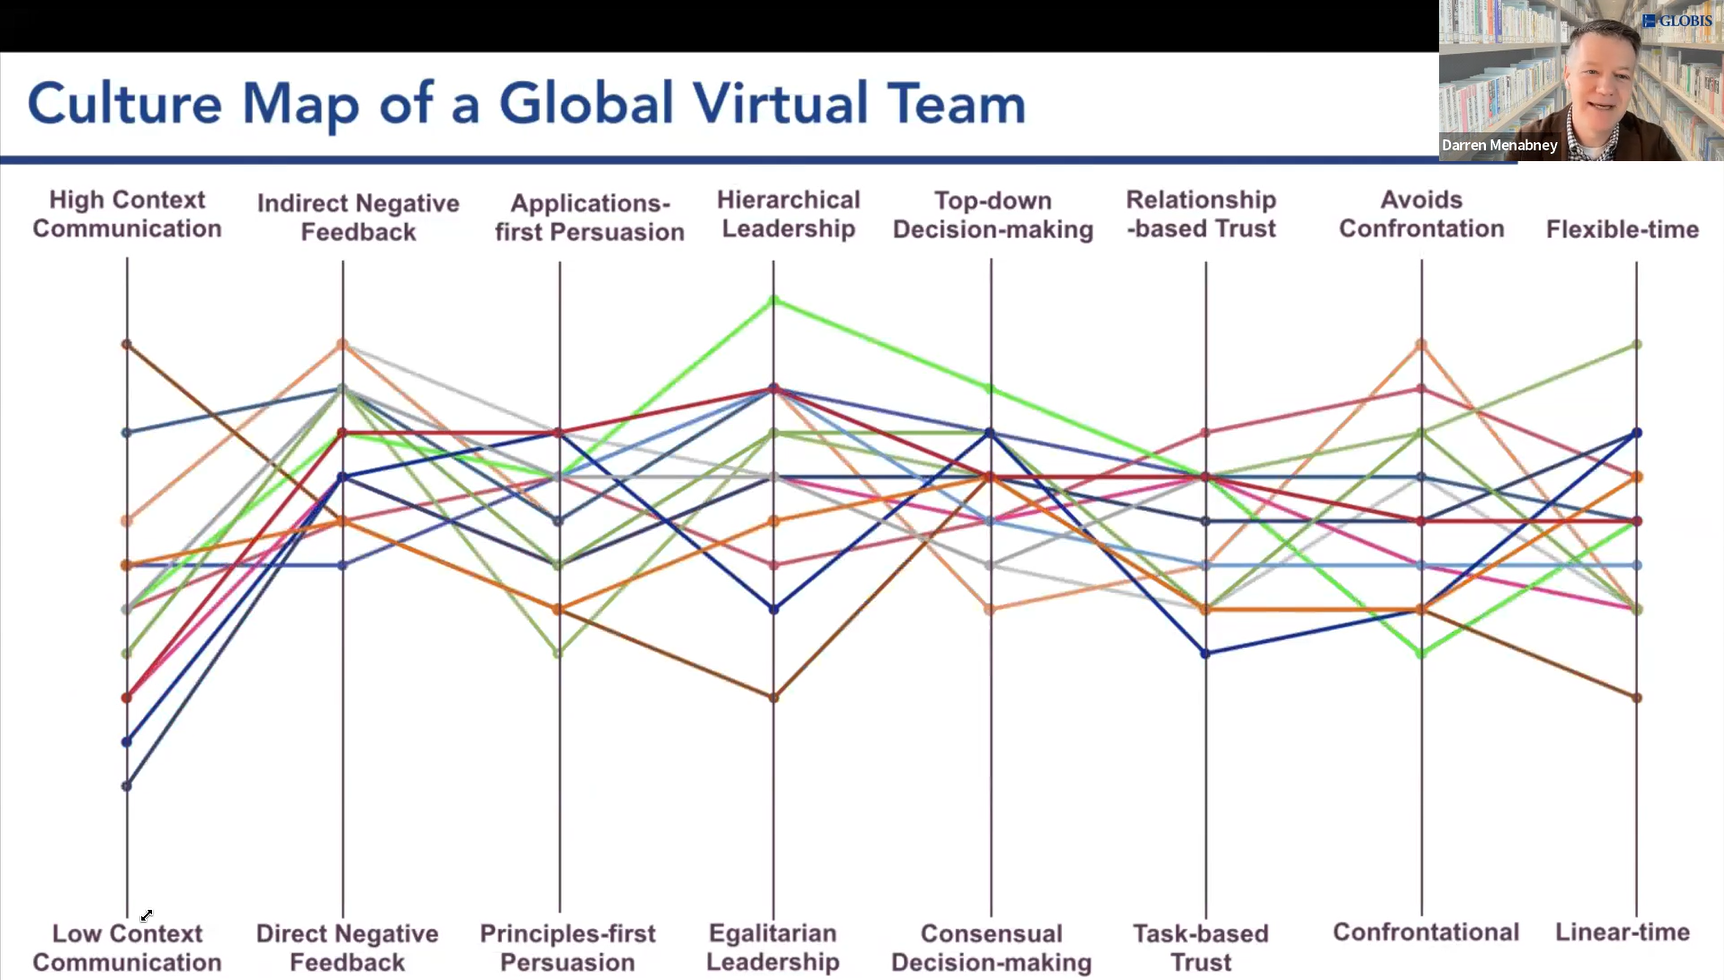 A culture map of a global team, as presented by Darren Menabney at a GLOBIS USA webinar about managing virtual collaboration for creativity